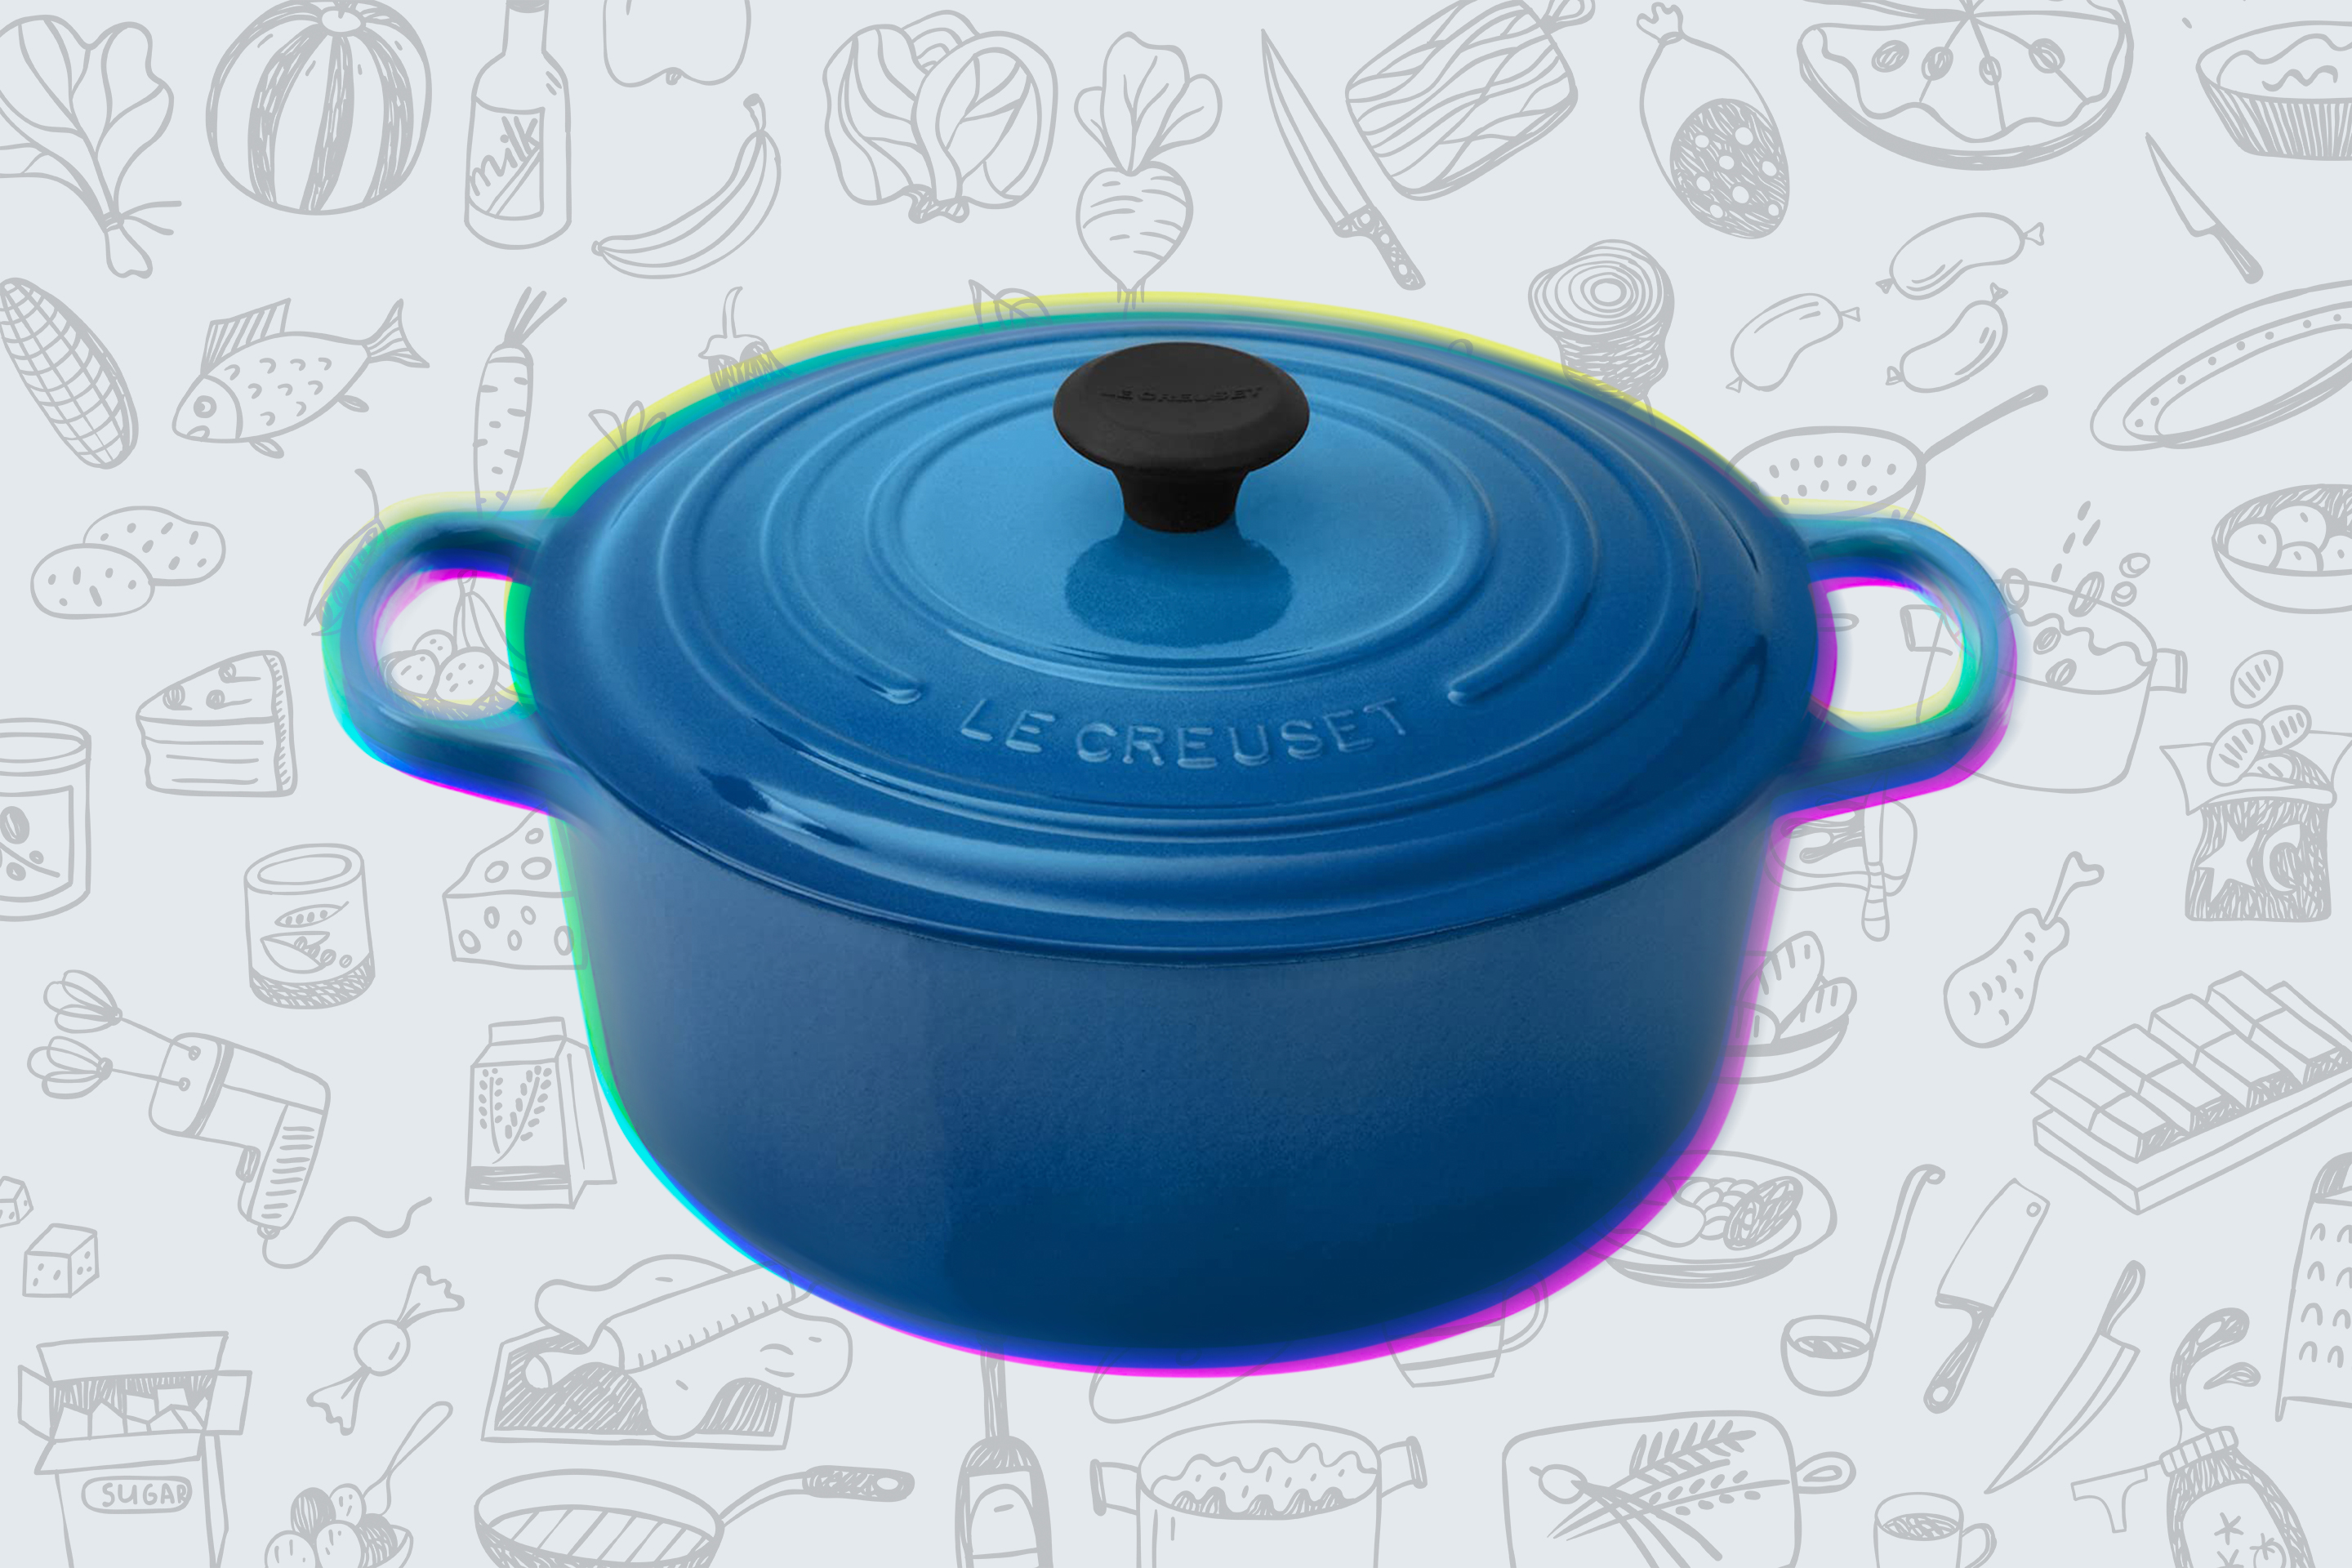 Lodge Just Released Its First-Ever All American-Made Enameled Dutch Oven  Collection